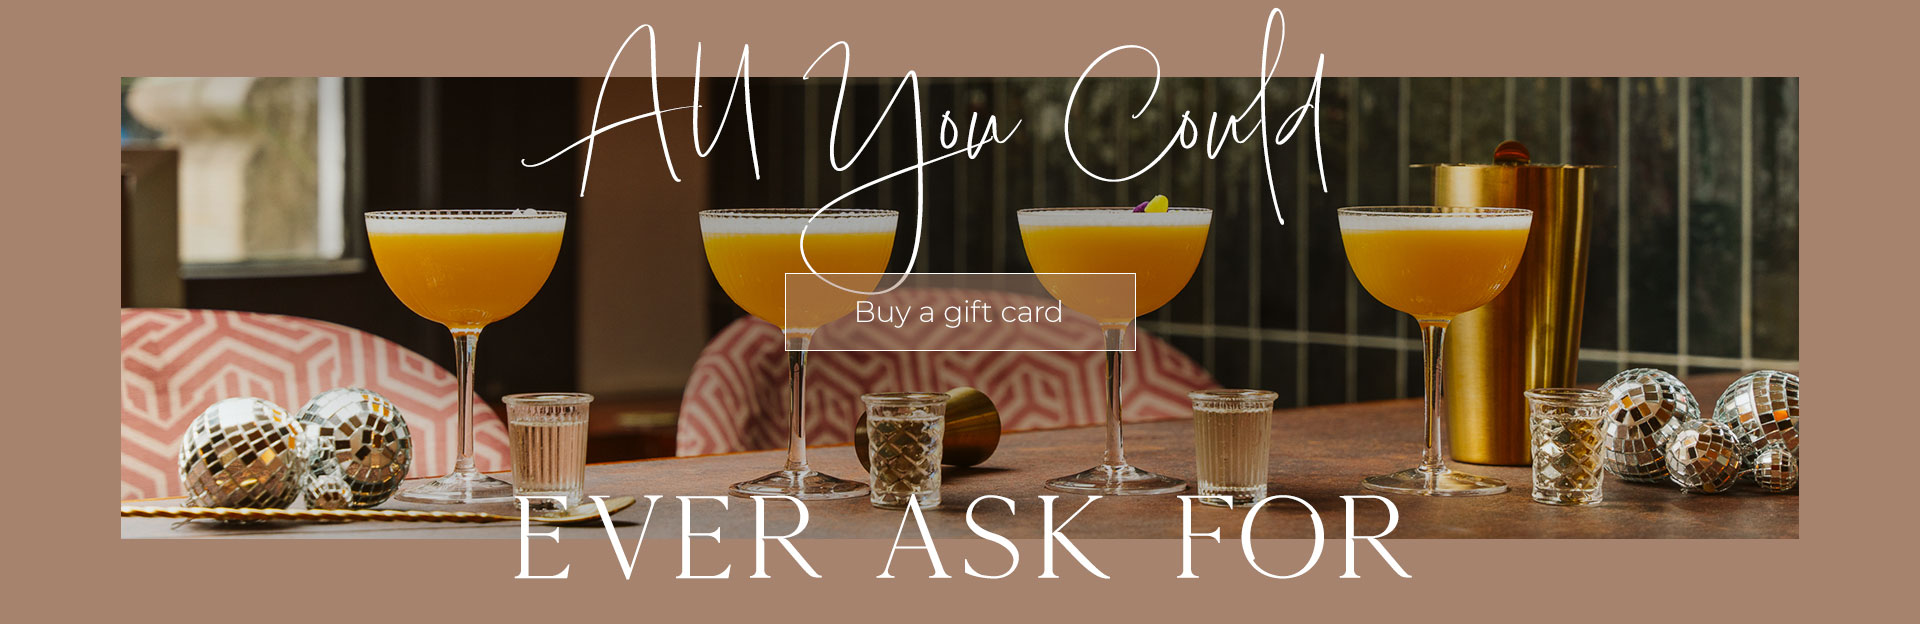 All Bar One Gift Cards at ABO Virtual